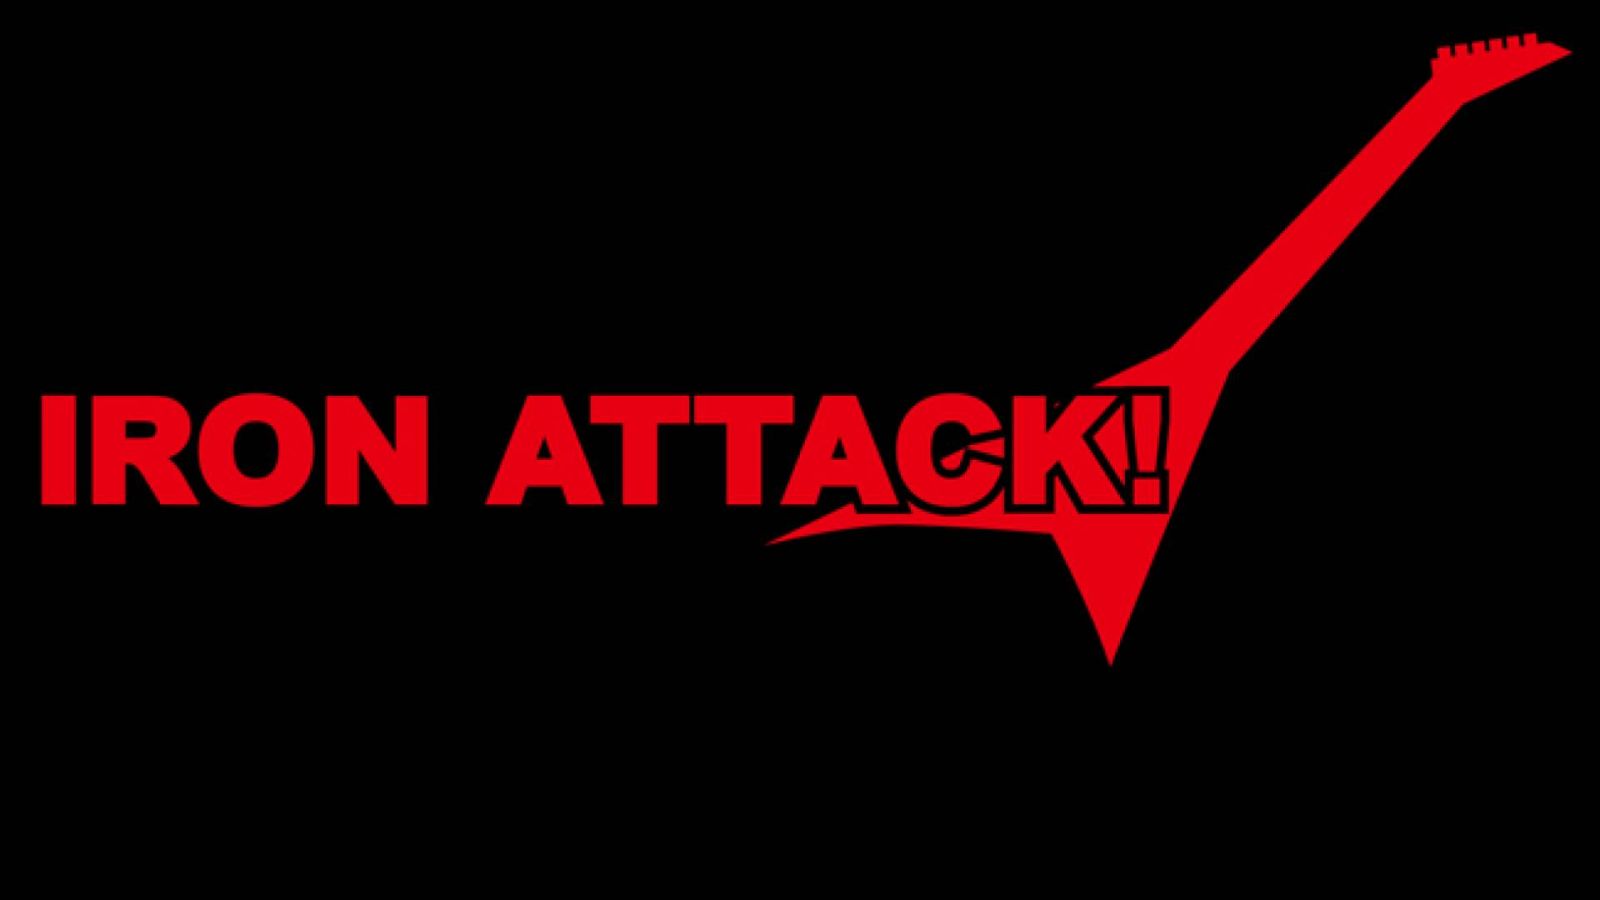 New Releases from IRON ATTACK! © 2015 IRON ATTACK! All rights reserved.